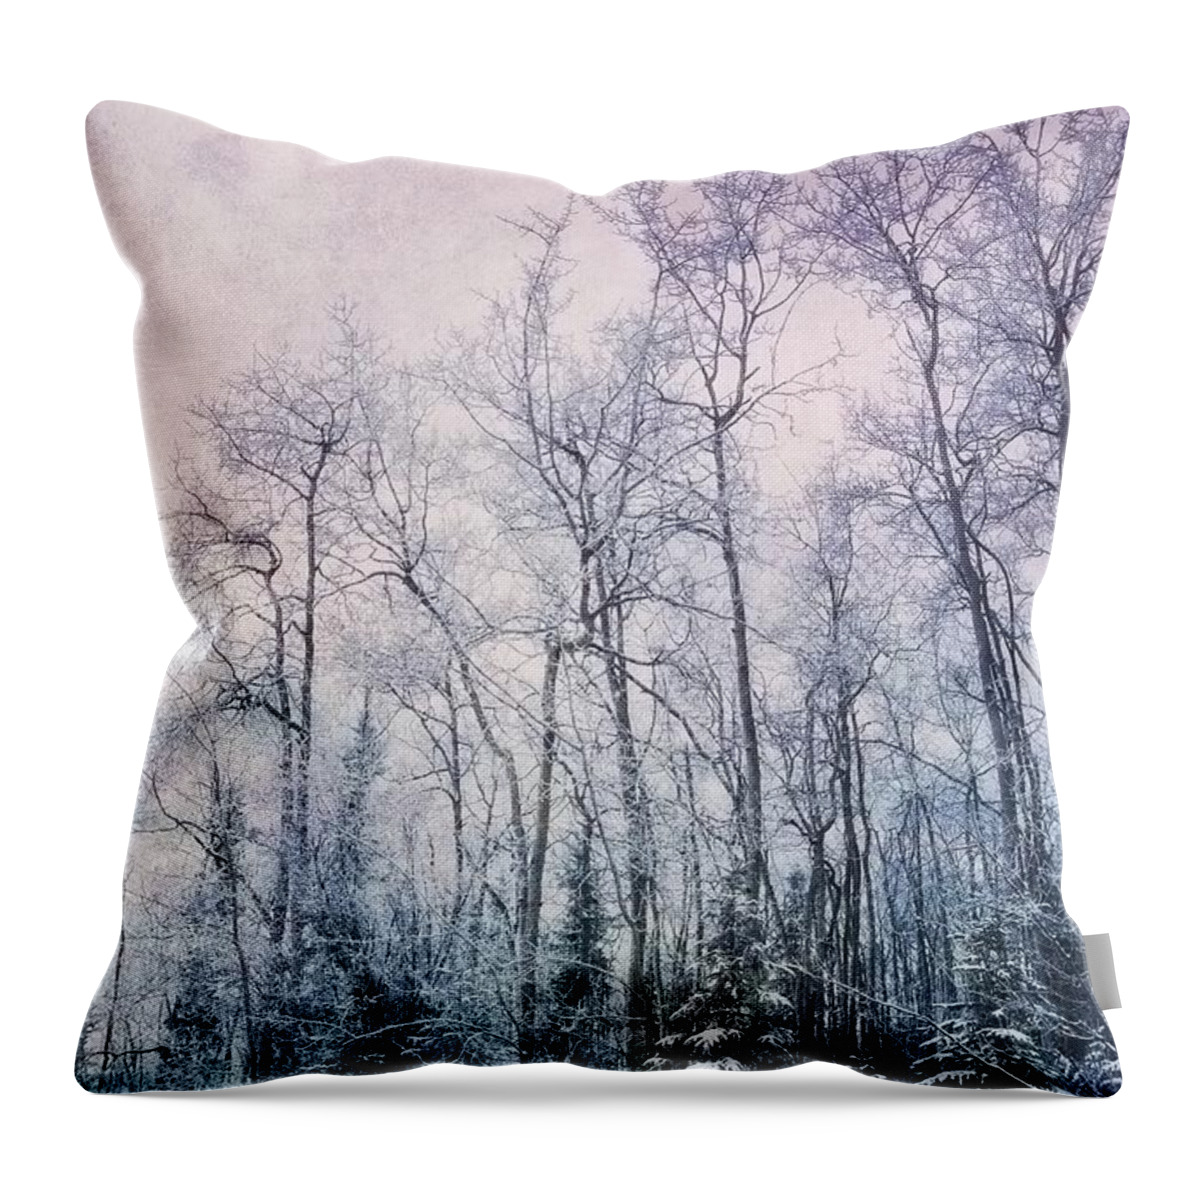 Forest Throw Pillow featuring the photograph Winter Forest by Priska Wettstein